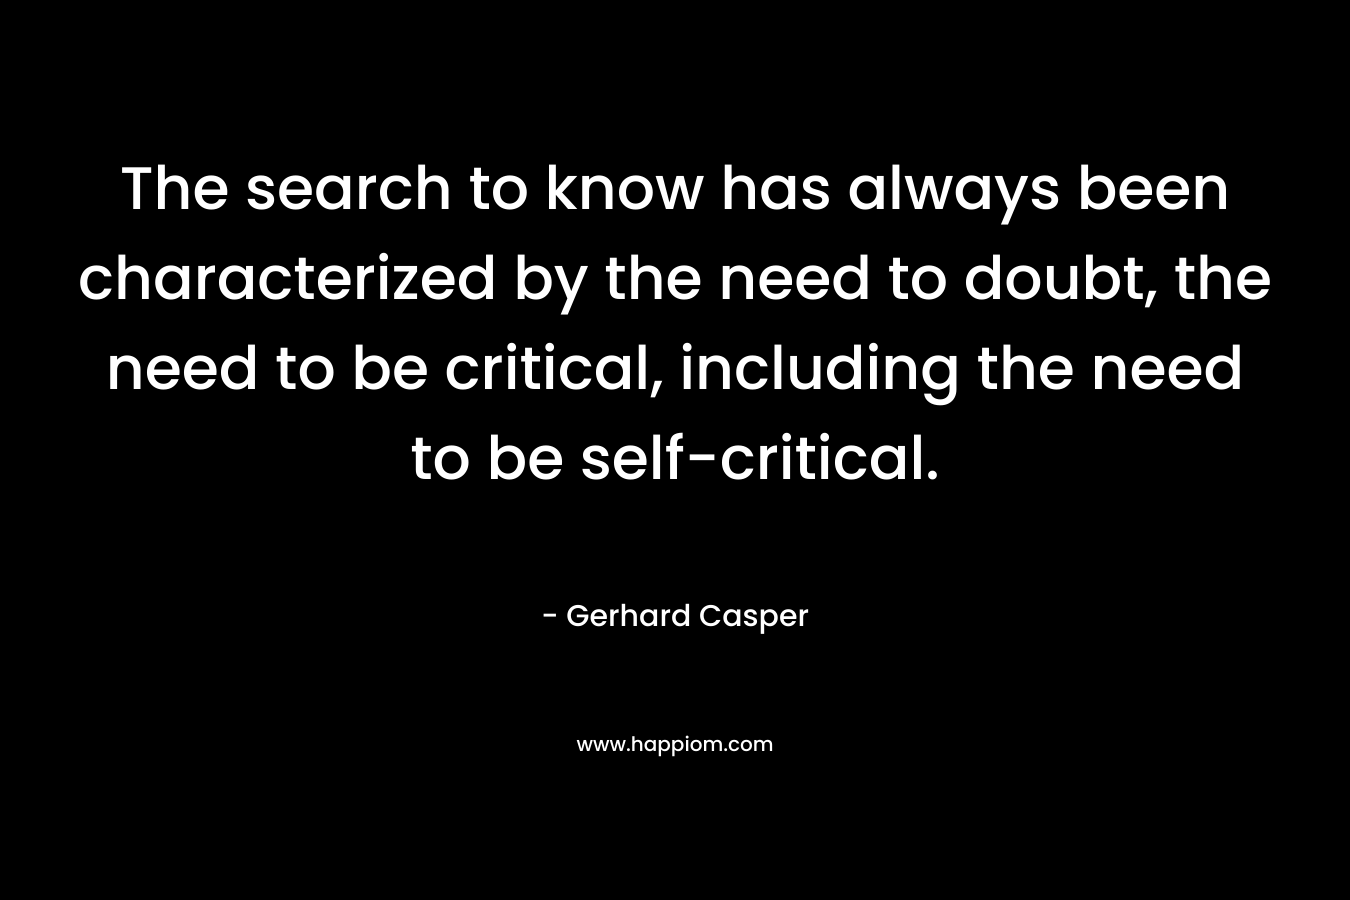 The search to know has always been characterized by the need to doubt, the need to be critical, including the need to be self-critical. – Gerhard Casper